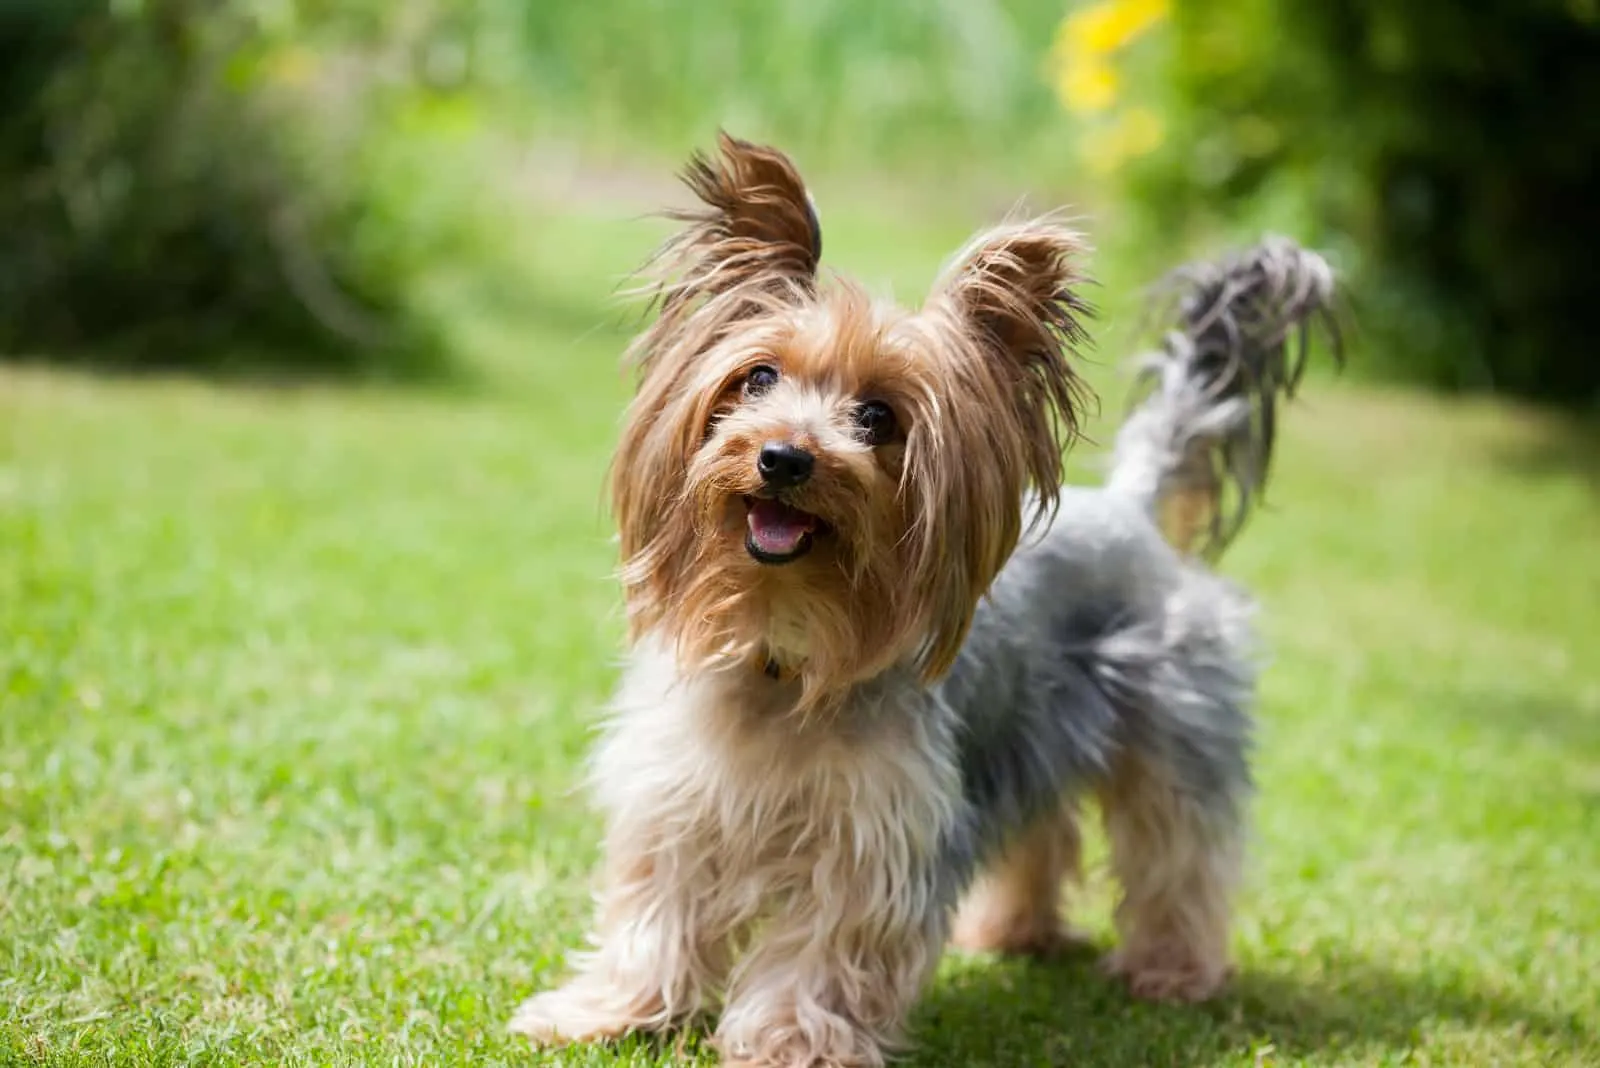 a yorkie dog stands on the grass